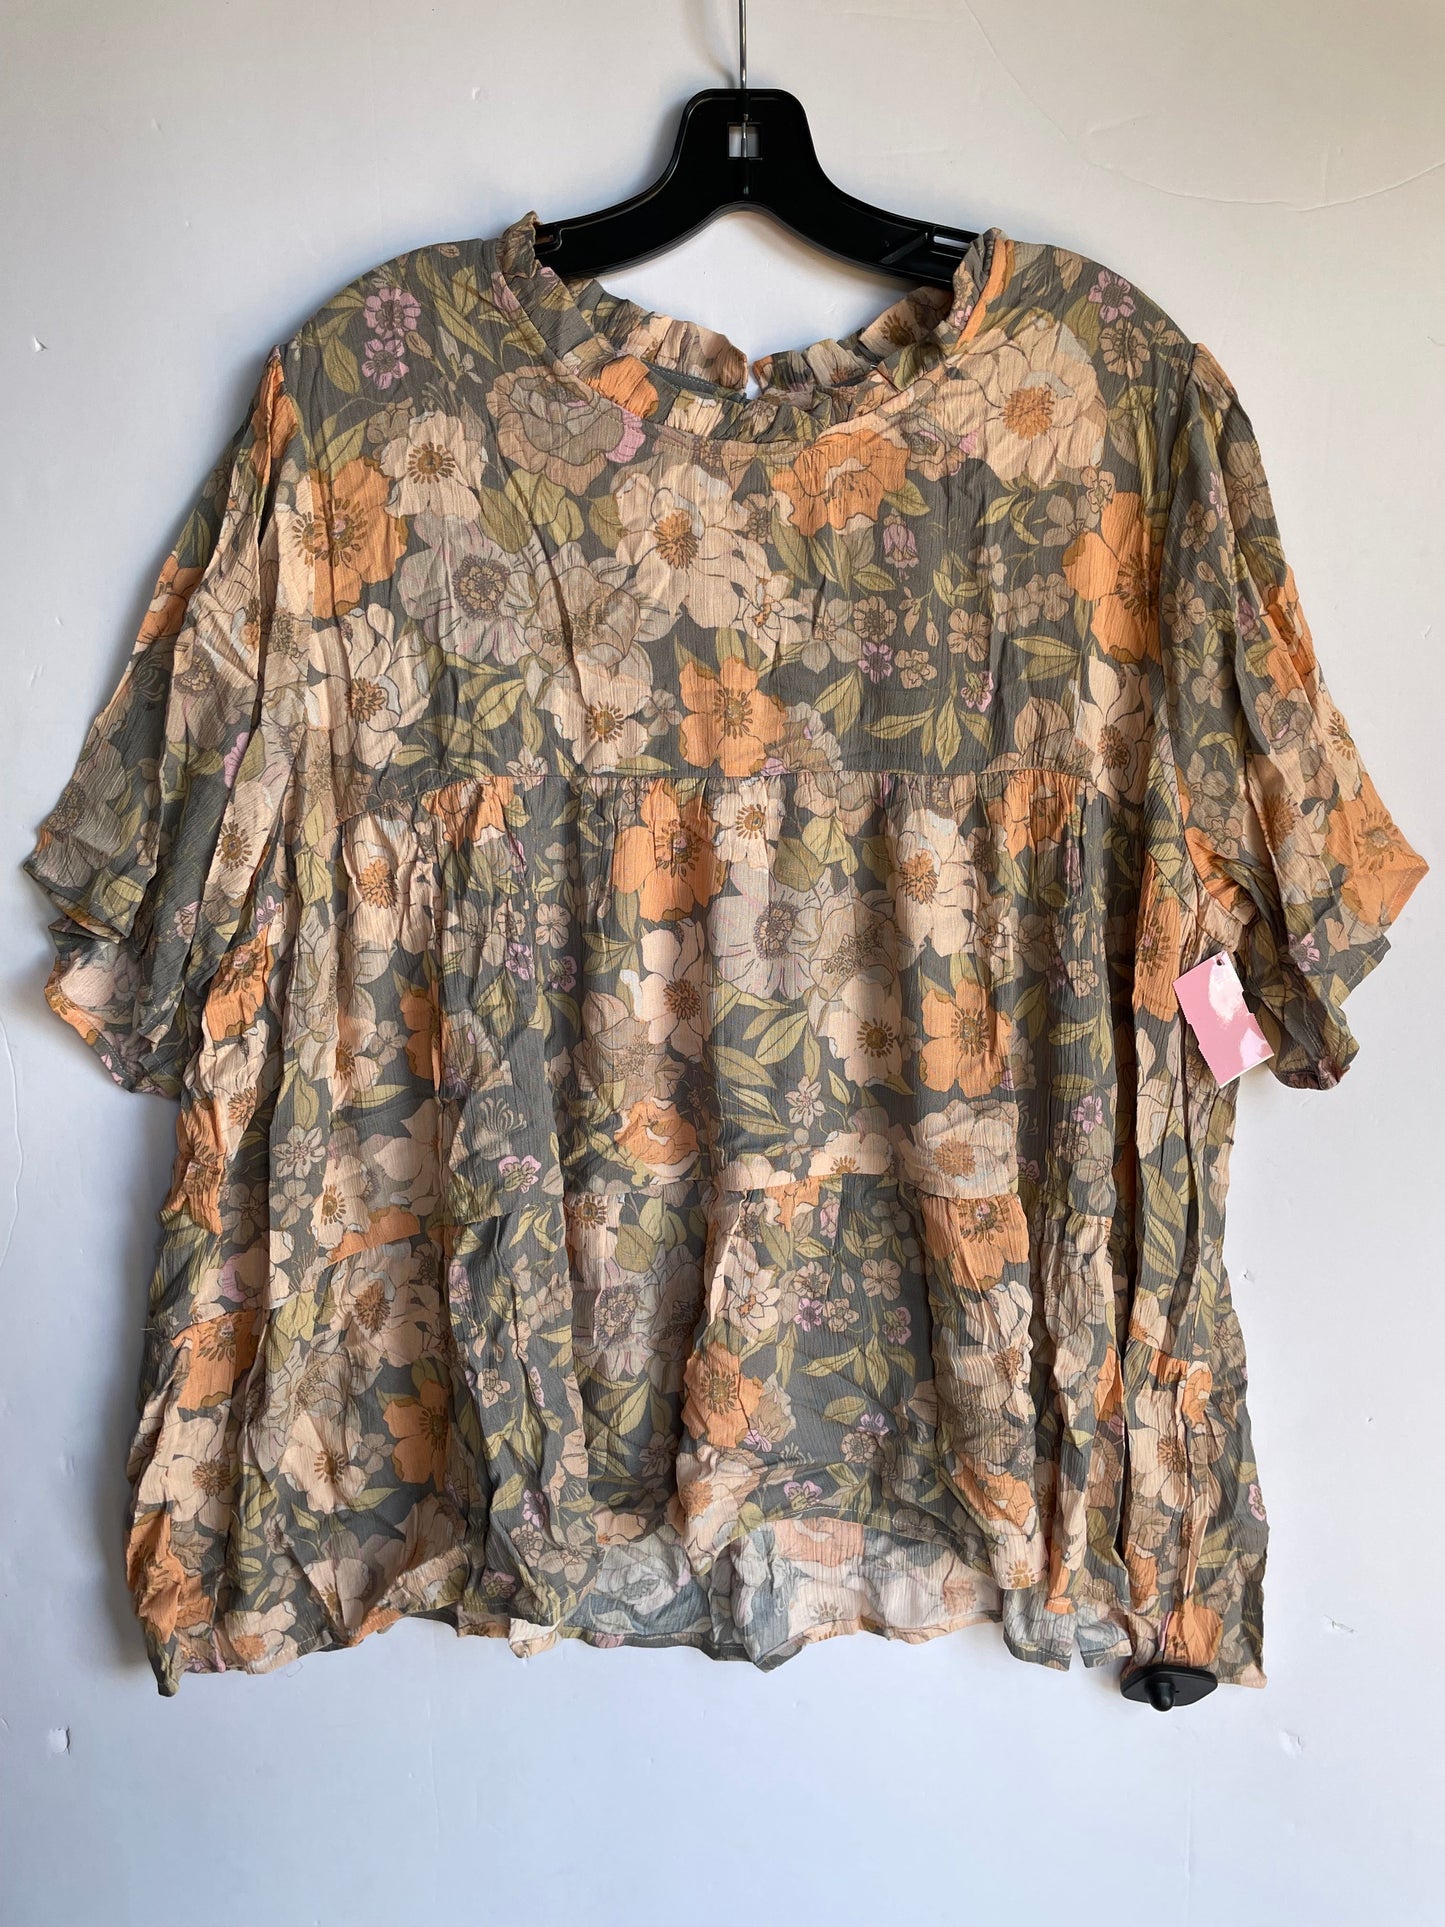 Floral Print Top Short Sleeve Clothes Mentor, Size 3x